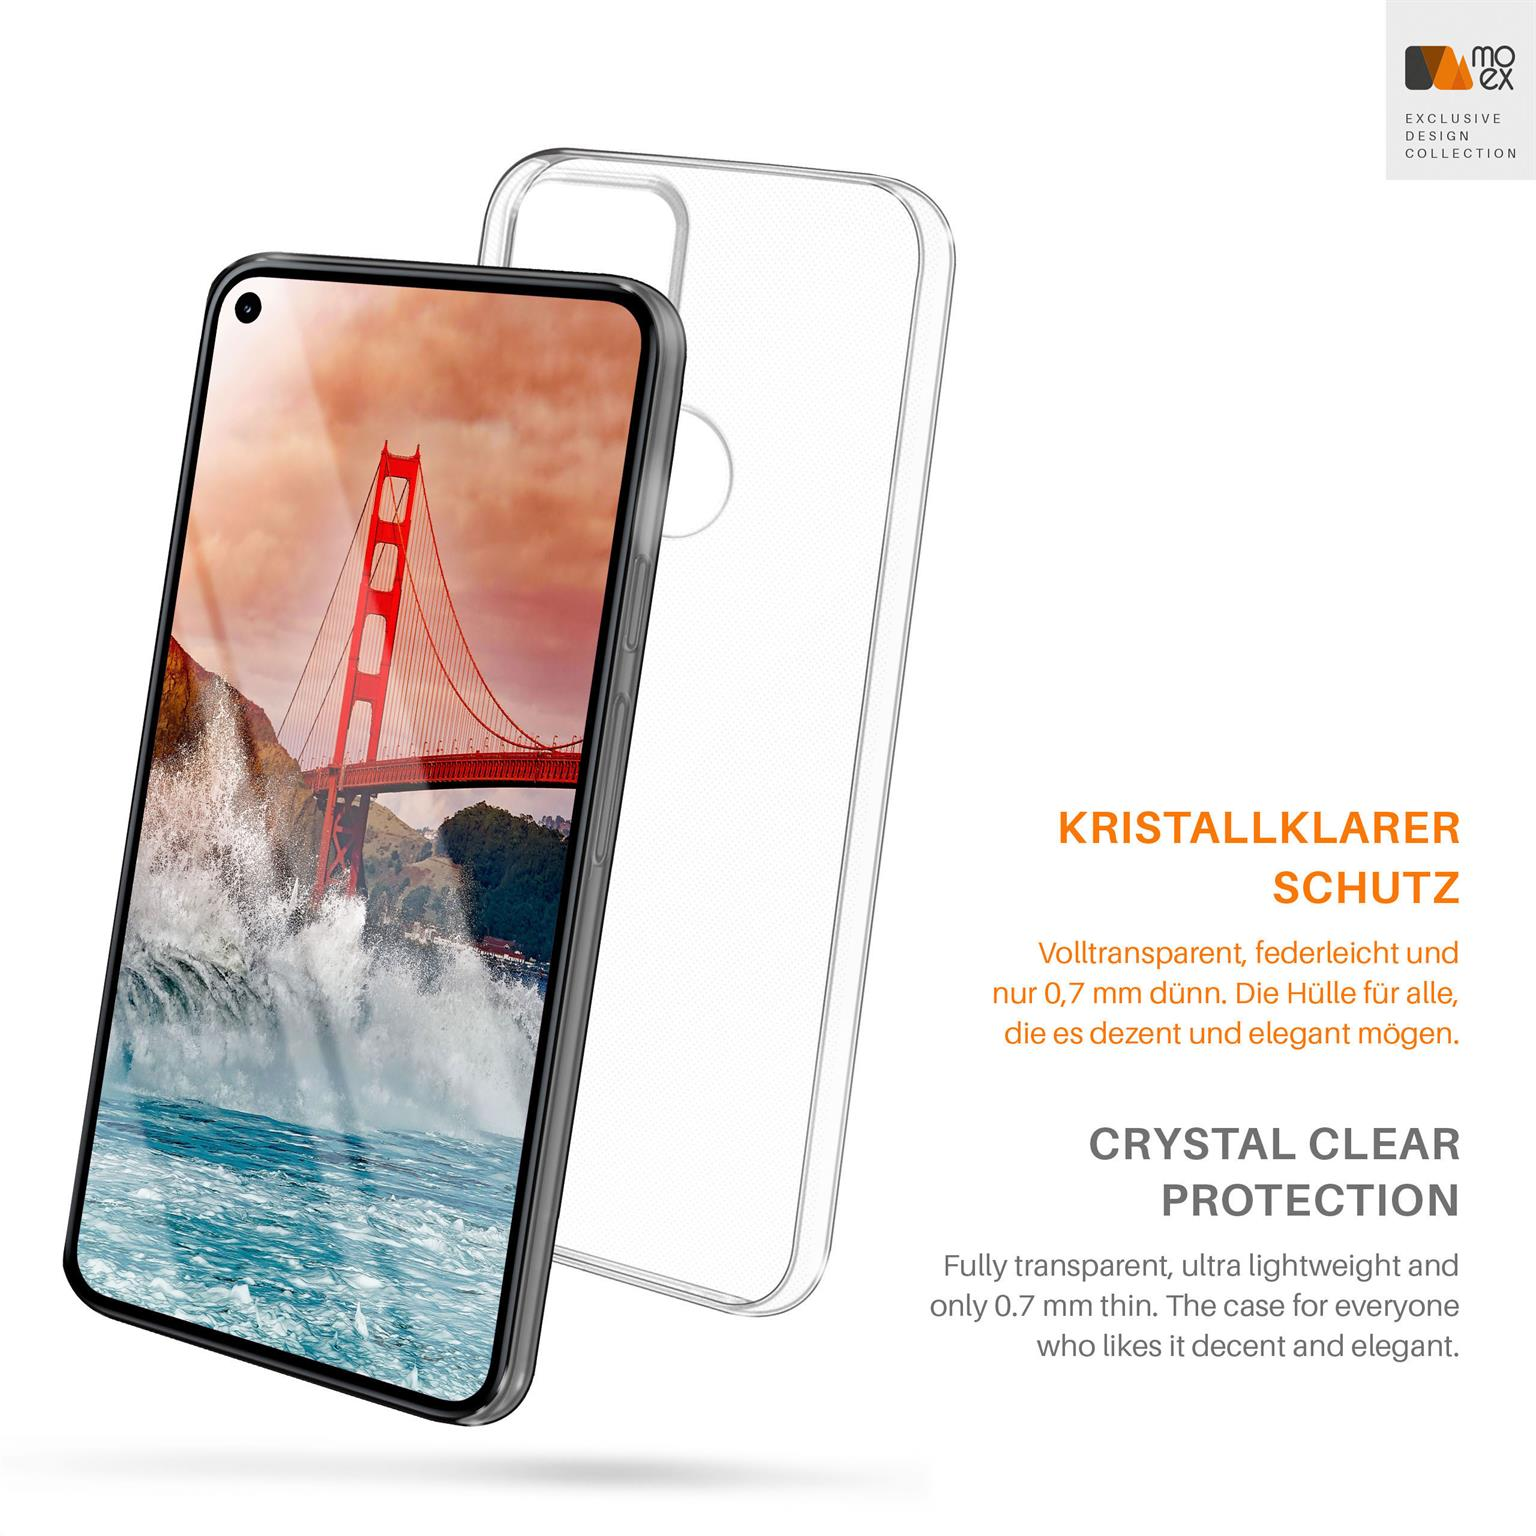 Google, Aero Backcover, Case, MOEX Crystal-Clear Pixel 5,